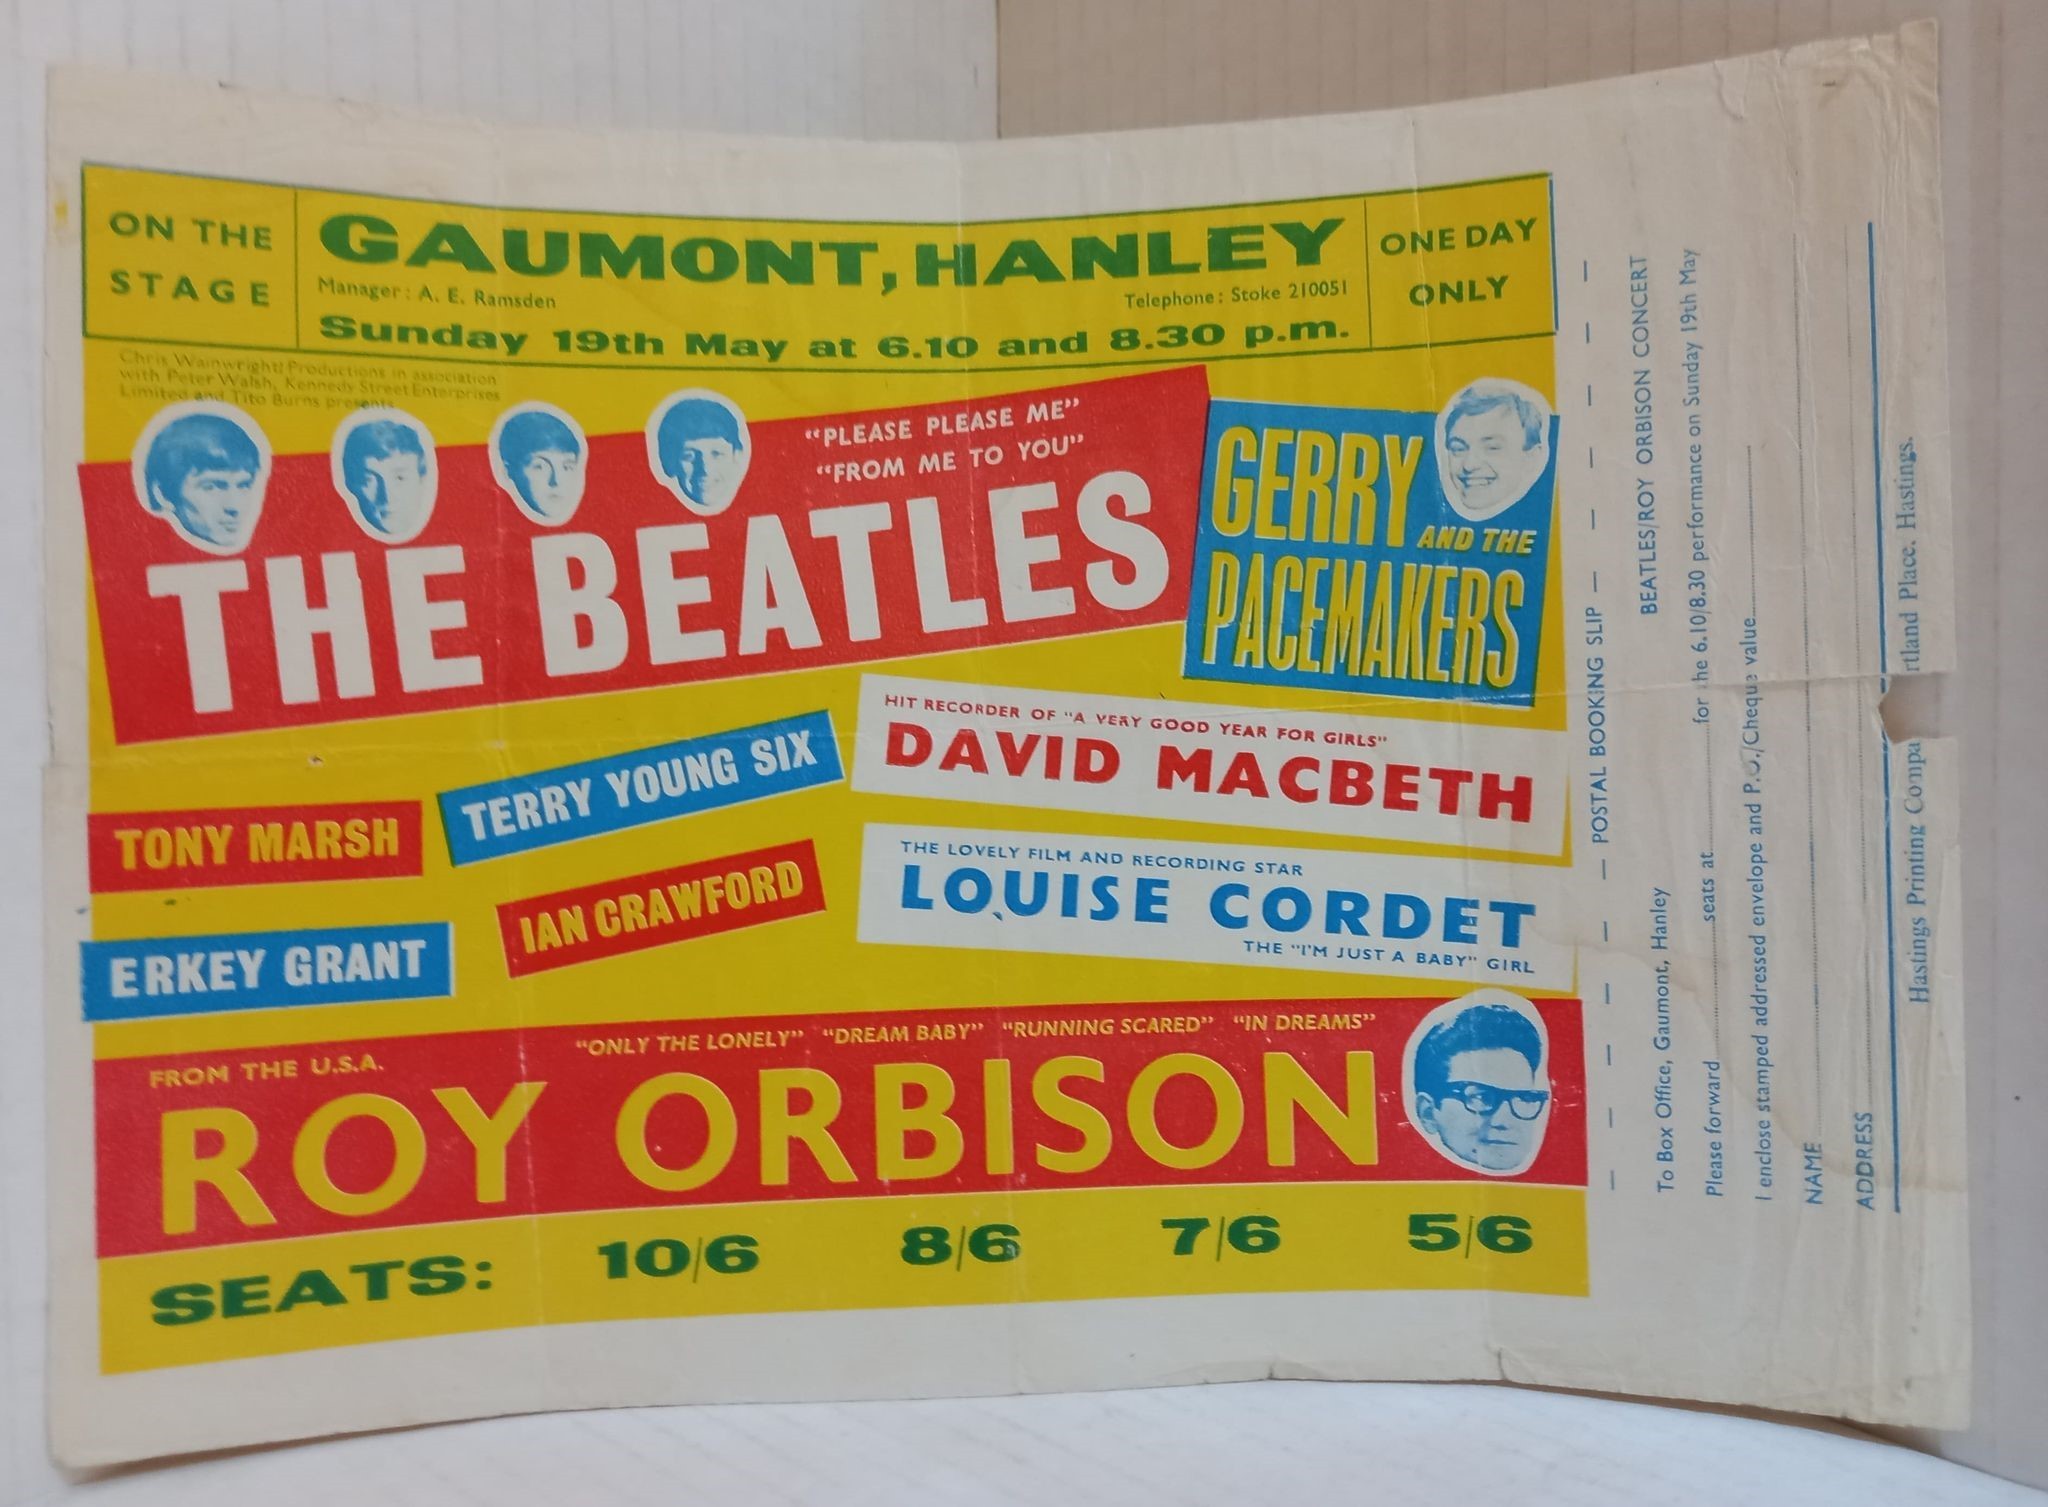 The Beatles and Roy Orbison Gaumont Hanley Handbill complete with booking slip dated 19th May 1963